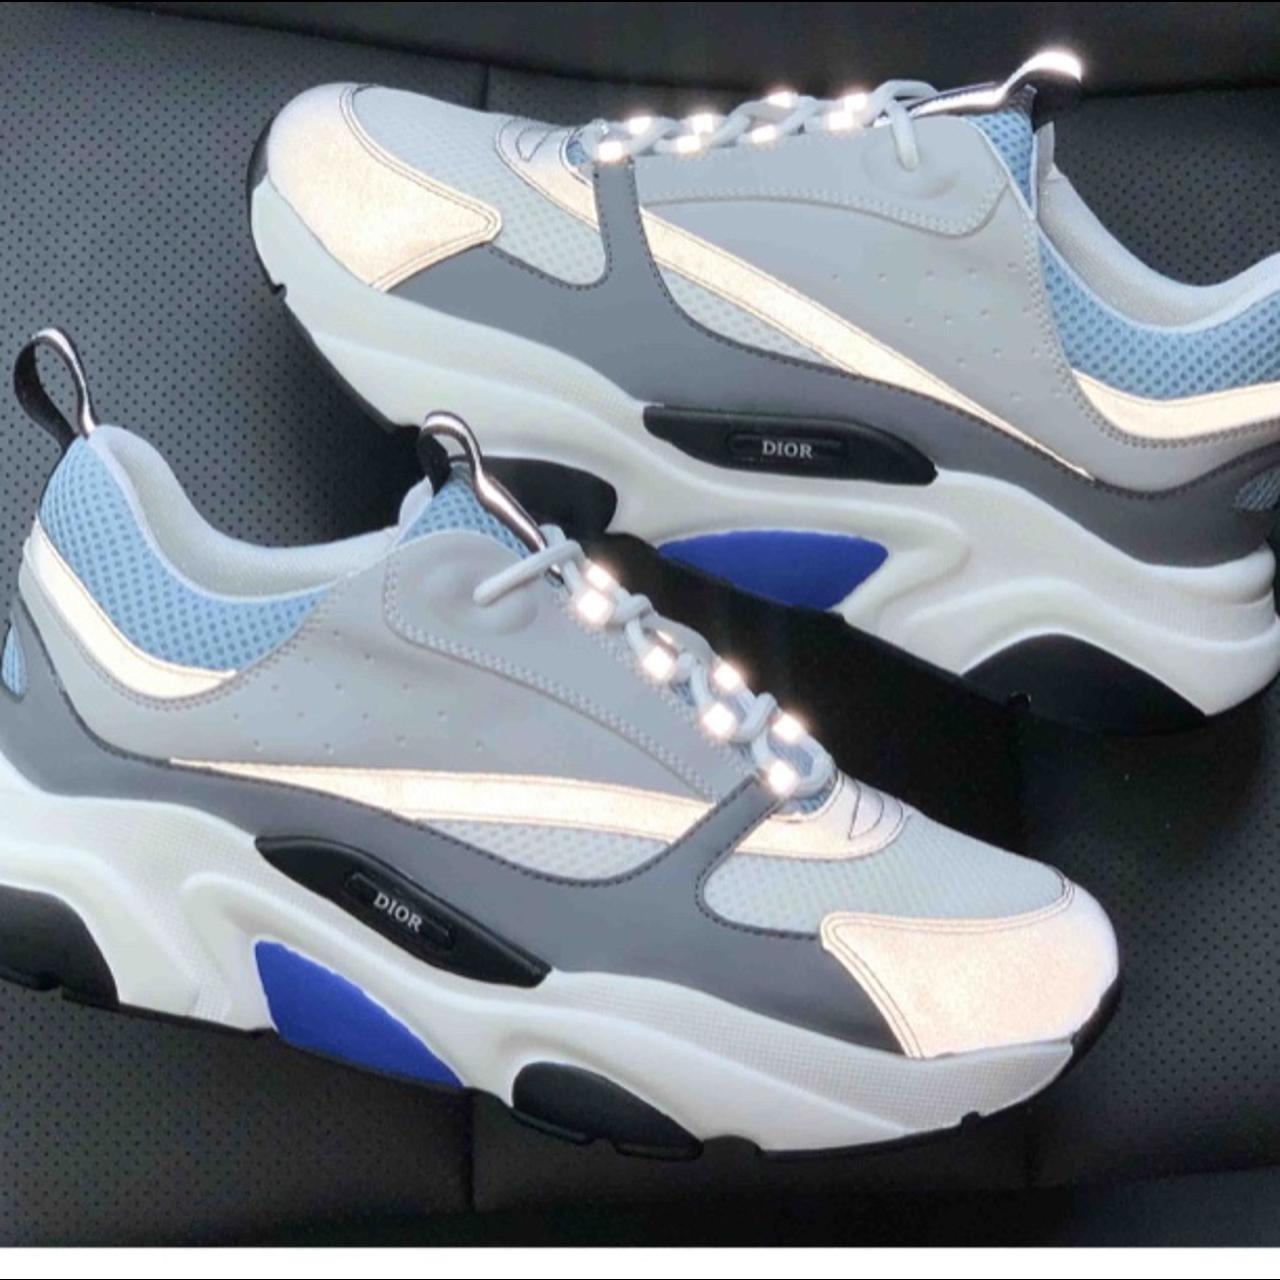 DIOR B22 Reflective sneakers (sky blue/grey)